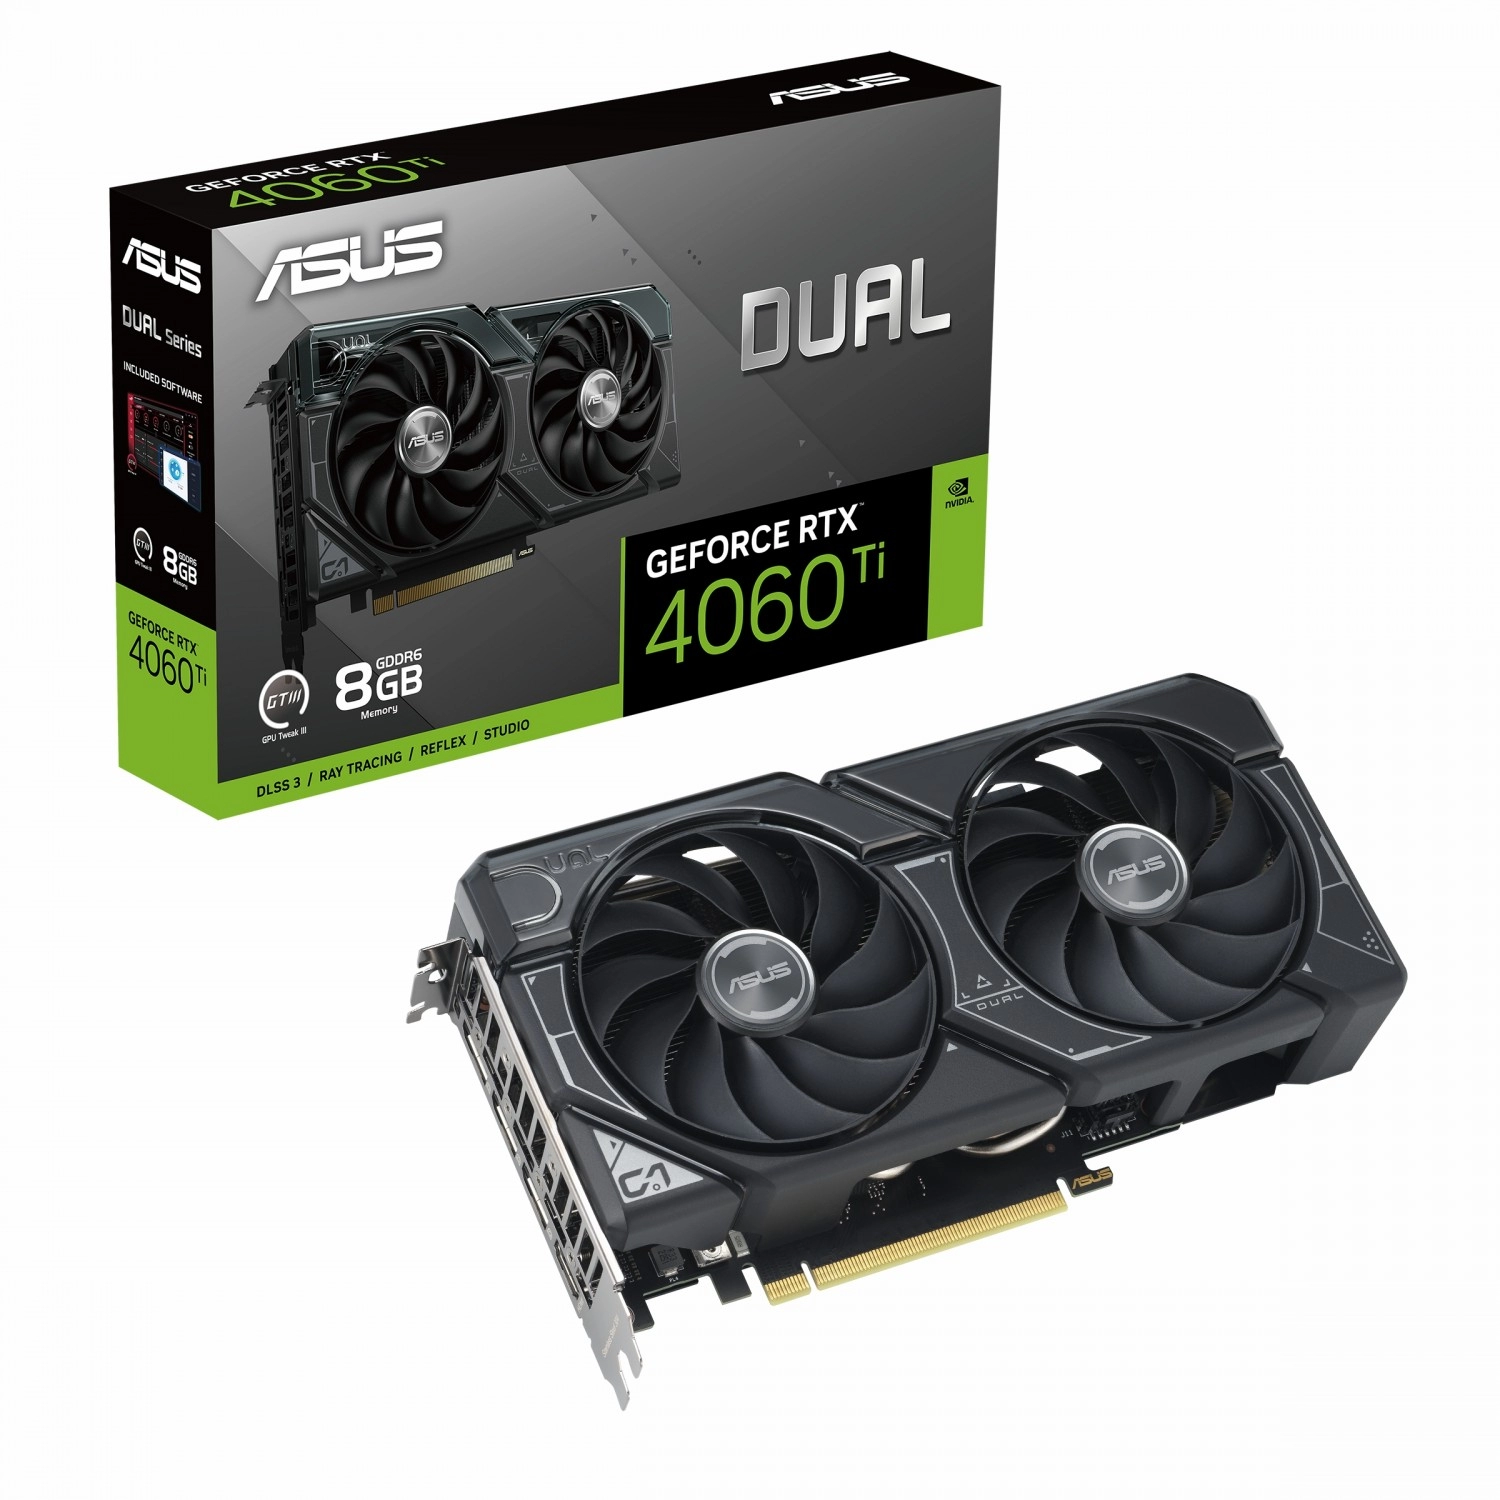 ASUS Dual GeForce RTX 4060 Ti 8GB GDDR6 Package